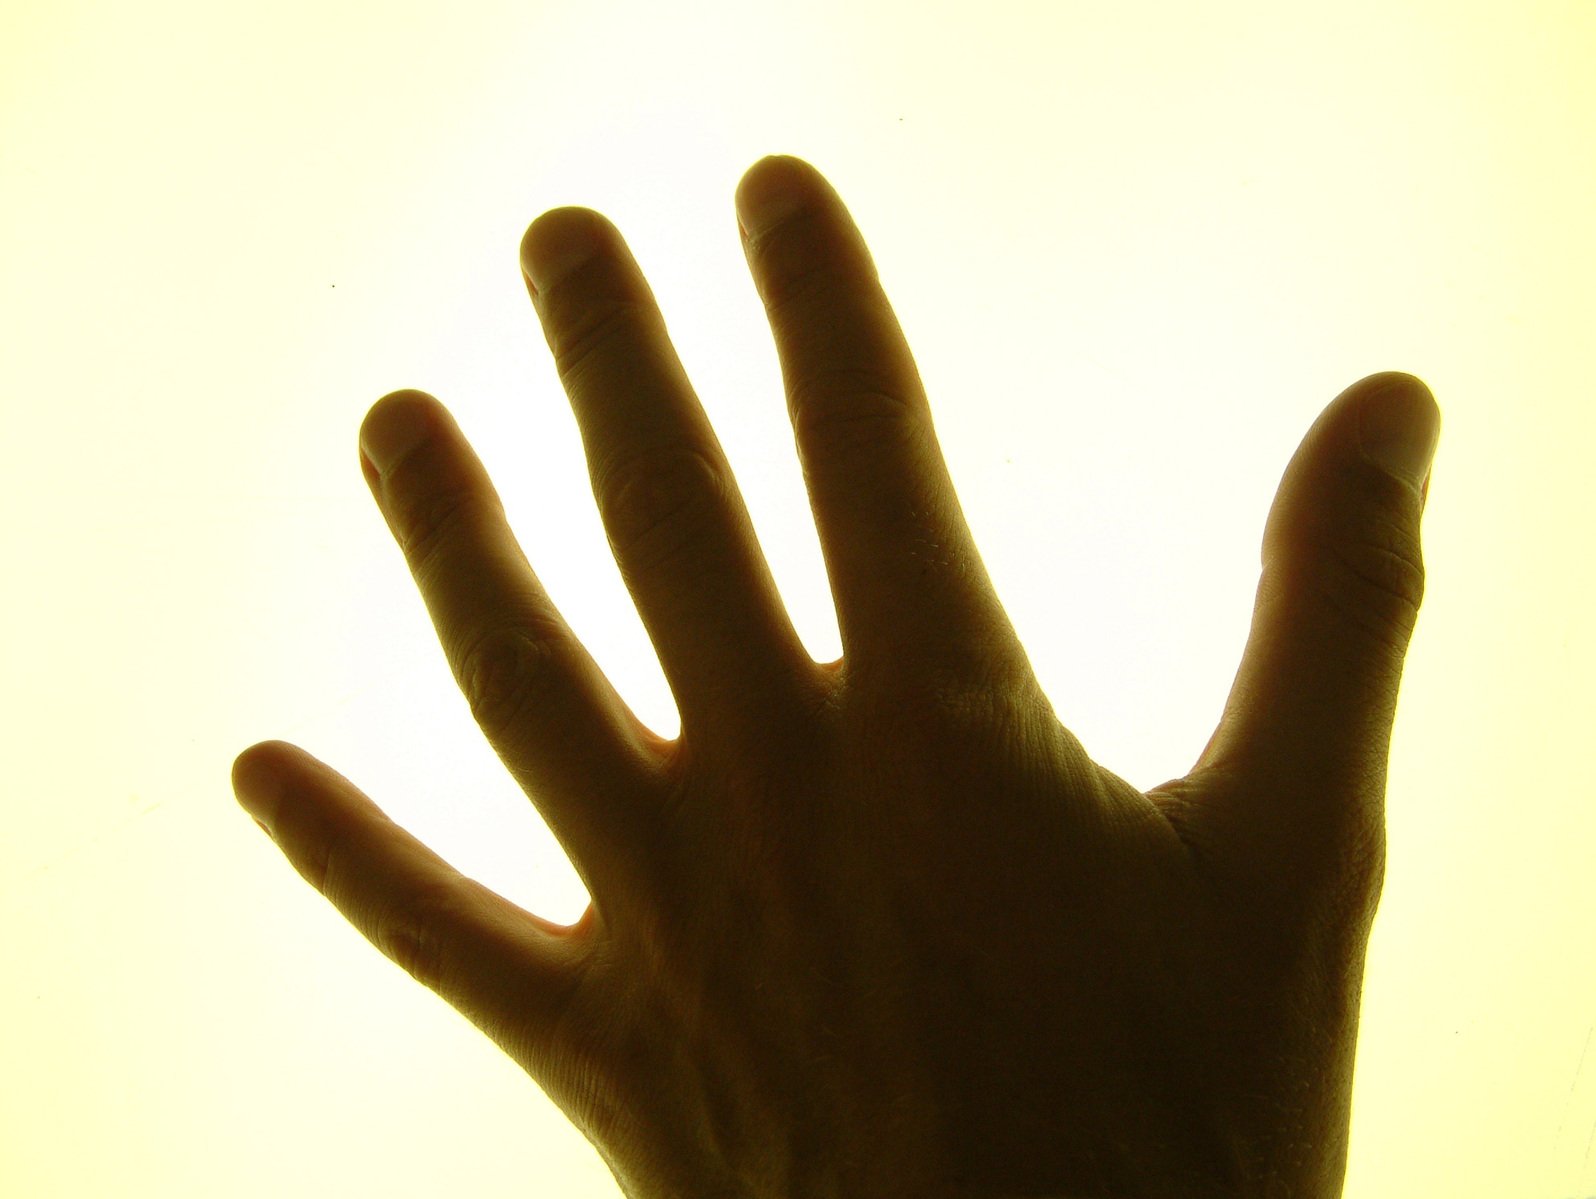 the right hand is outstretched towards the sun